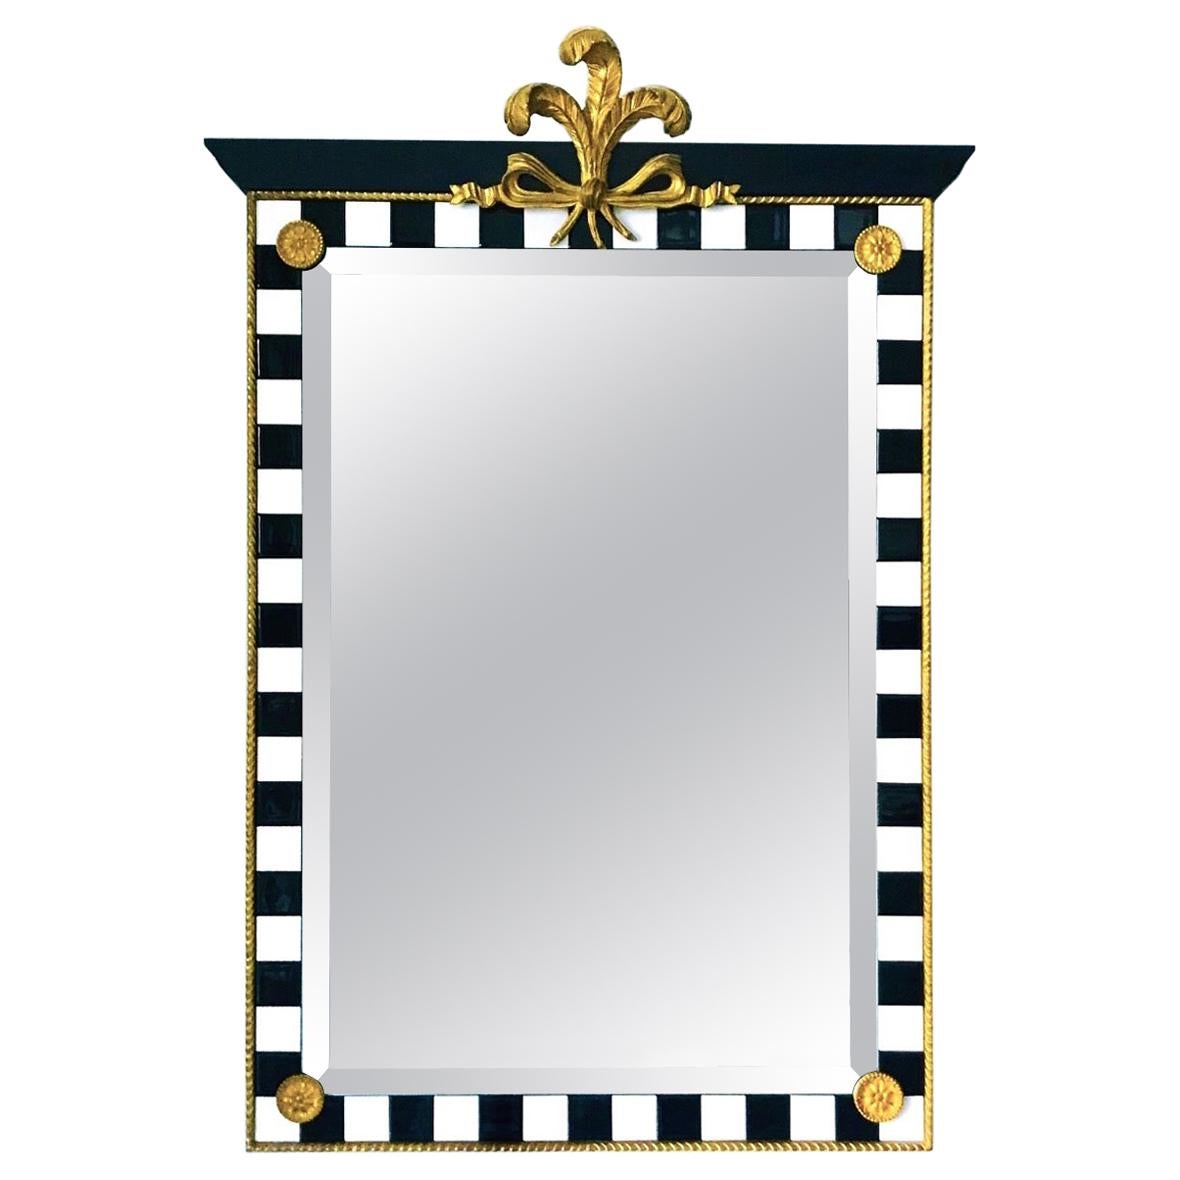 Hollywood Regency Mirror with Gold Leaf Plumes and Ceramic Tiles